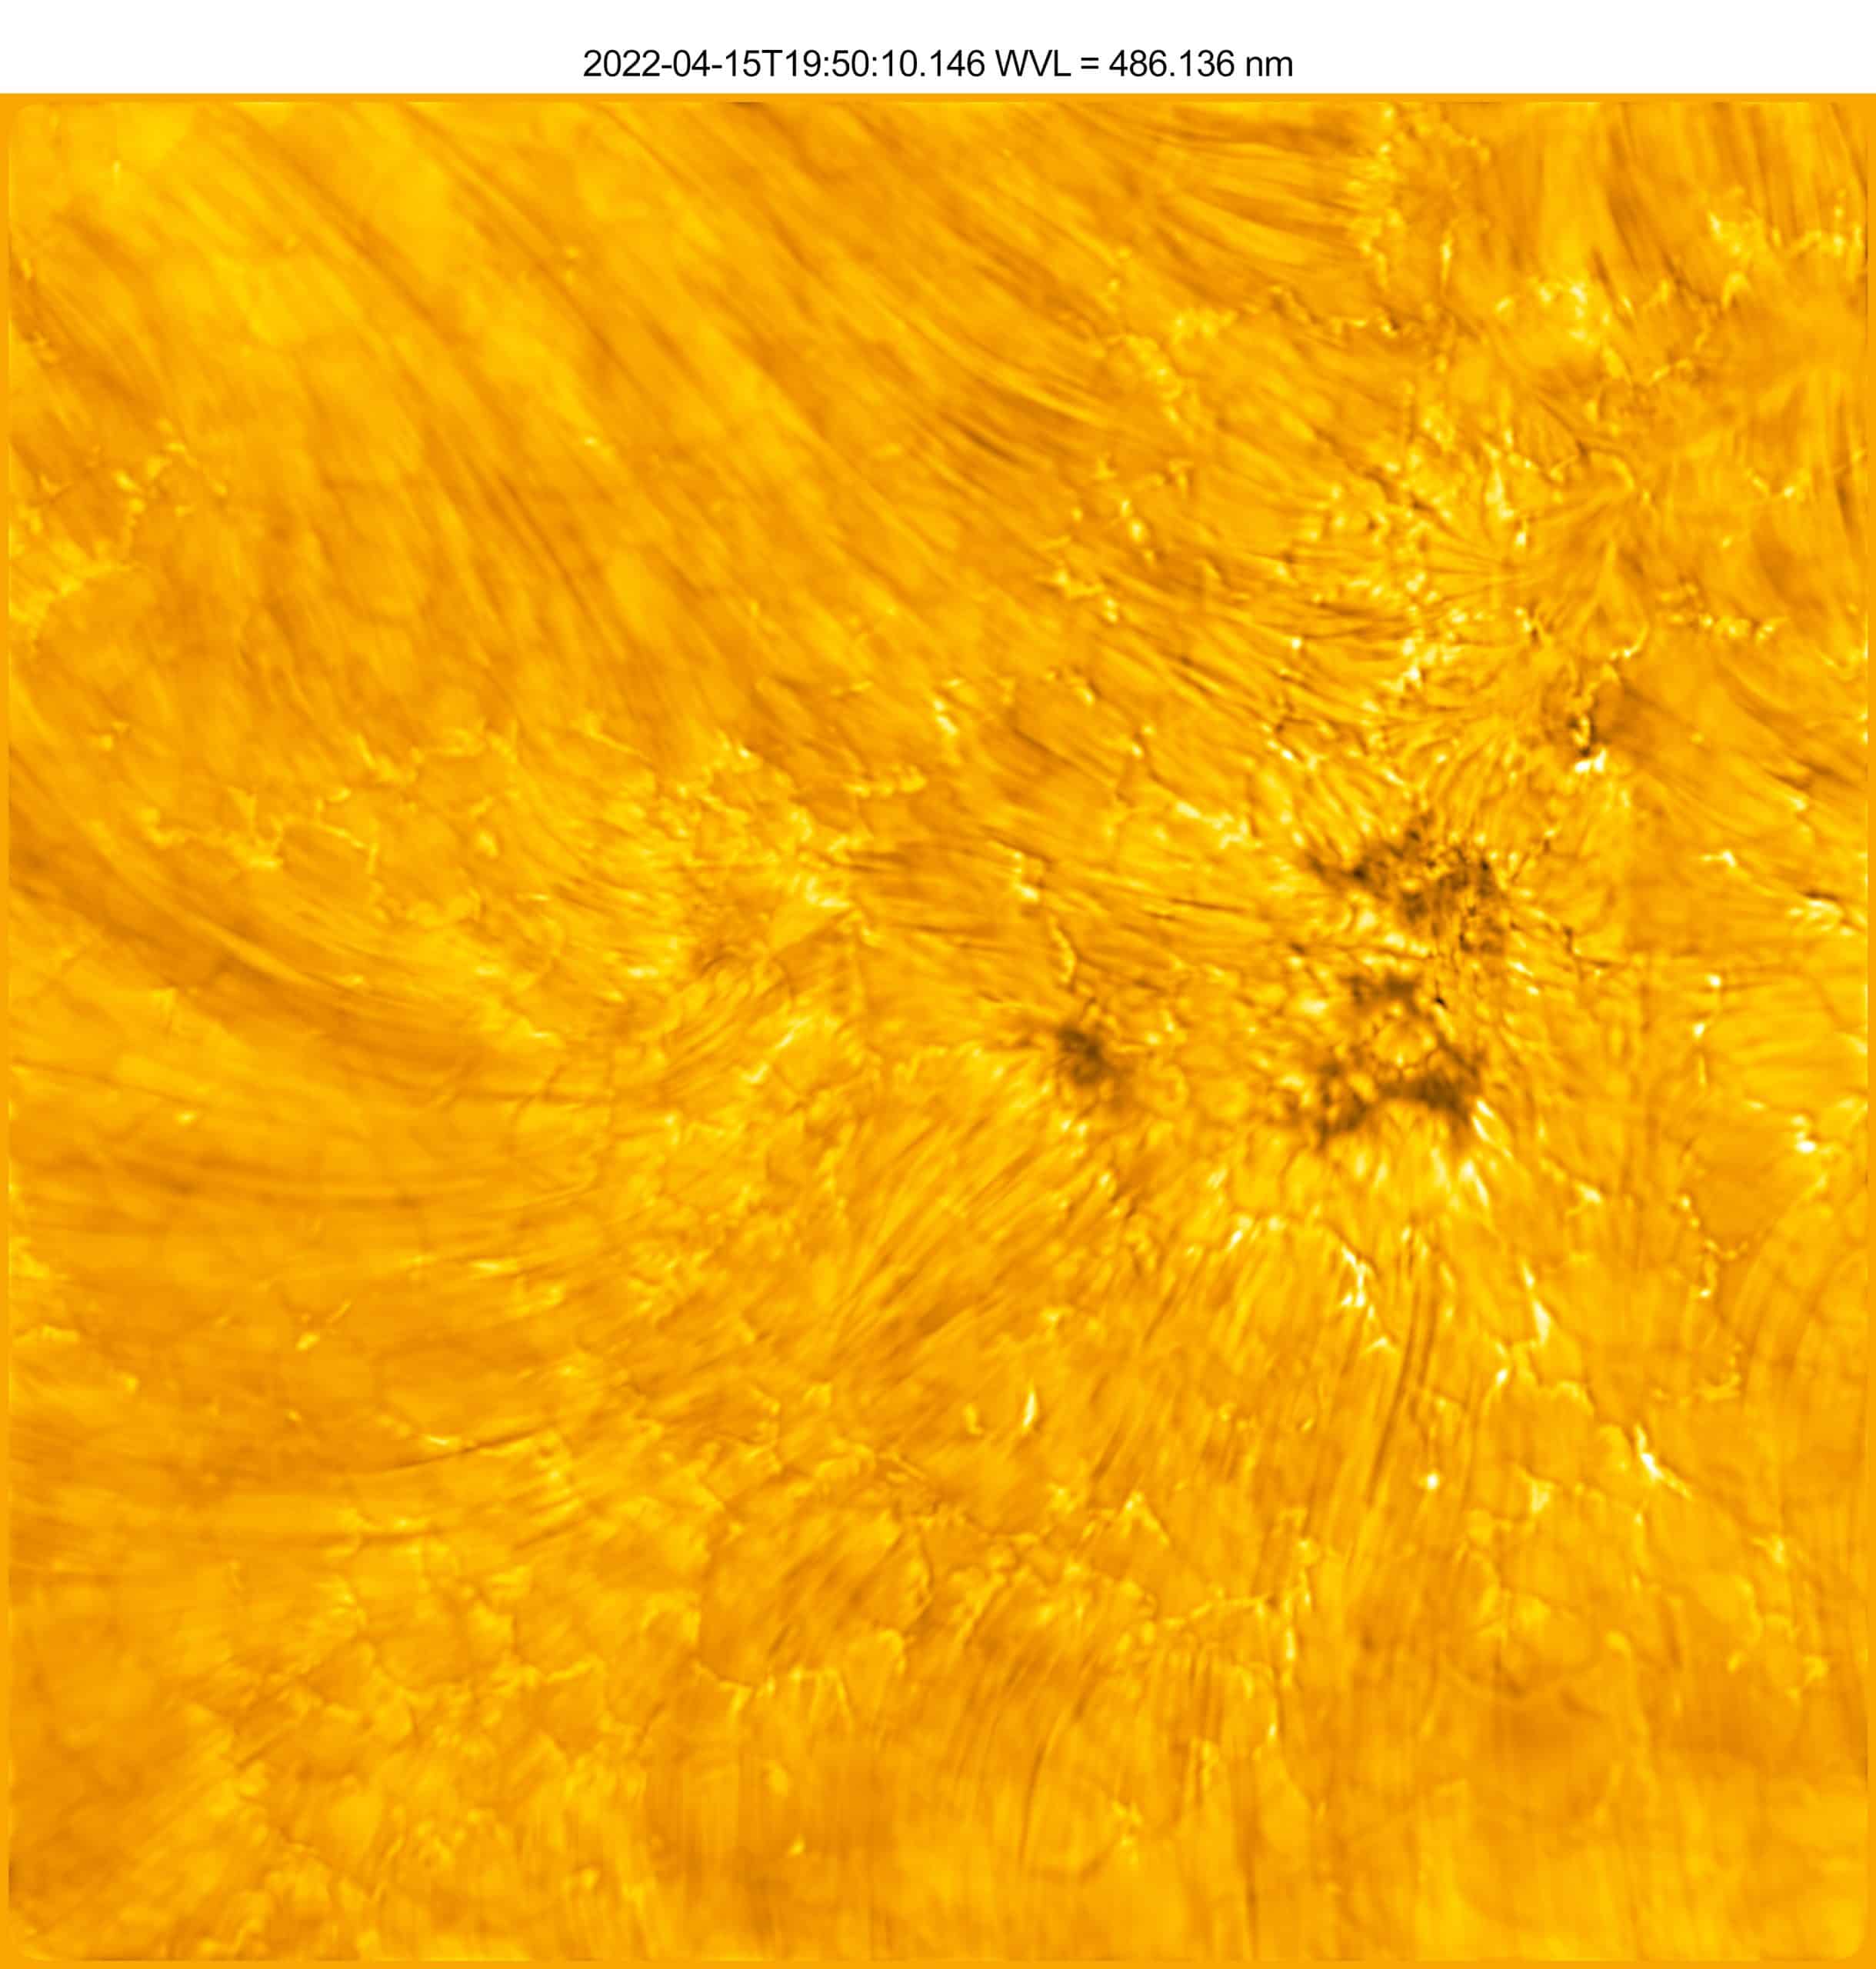 The lower atmosphere (chromosphere) of the Sun exists above the Sun’s surface (photosphere). In this image, dark, fine threads (fibrils) are visible in the chromosphere emanating from sources in the photosphere - notably, the dark pores/umbral fragments and their fine structure. A pore is a concentration of magnetic field where conditions are not met to form a penumbra. Pores are essentially sunspots that have not had or will never have a penumbra. Penumbra: The brighter, surrounding region of a sunspot’s umbra characterized by bright filamentary structures. Image Title: Pores/Umbral Fragments, Fibrils, and other Fine-Structure in the Sun’s Atmosphere and Surface PID: PID_1_16 Large Field of View: 30,720km x 30,720km Image Credit: NSF/AURA/NSO Image Processing: Friedrich Wöger(NSO), Catherine Fischer (NSO) Science Credit: Juan Martínez-Sykora (Bay Area Environmental Research Institute)